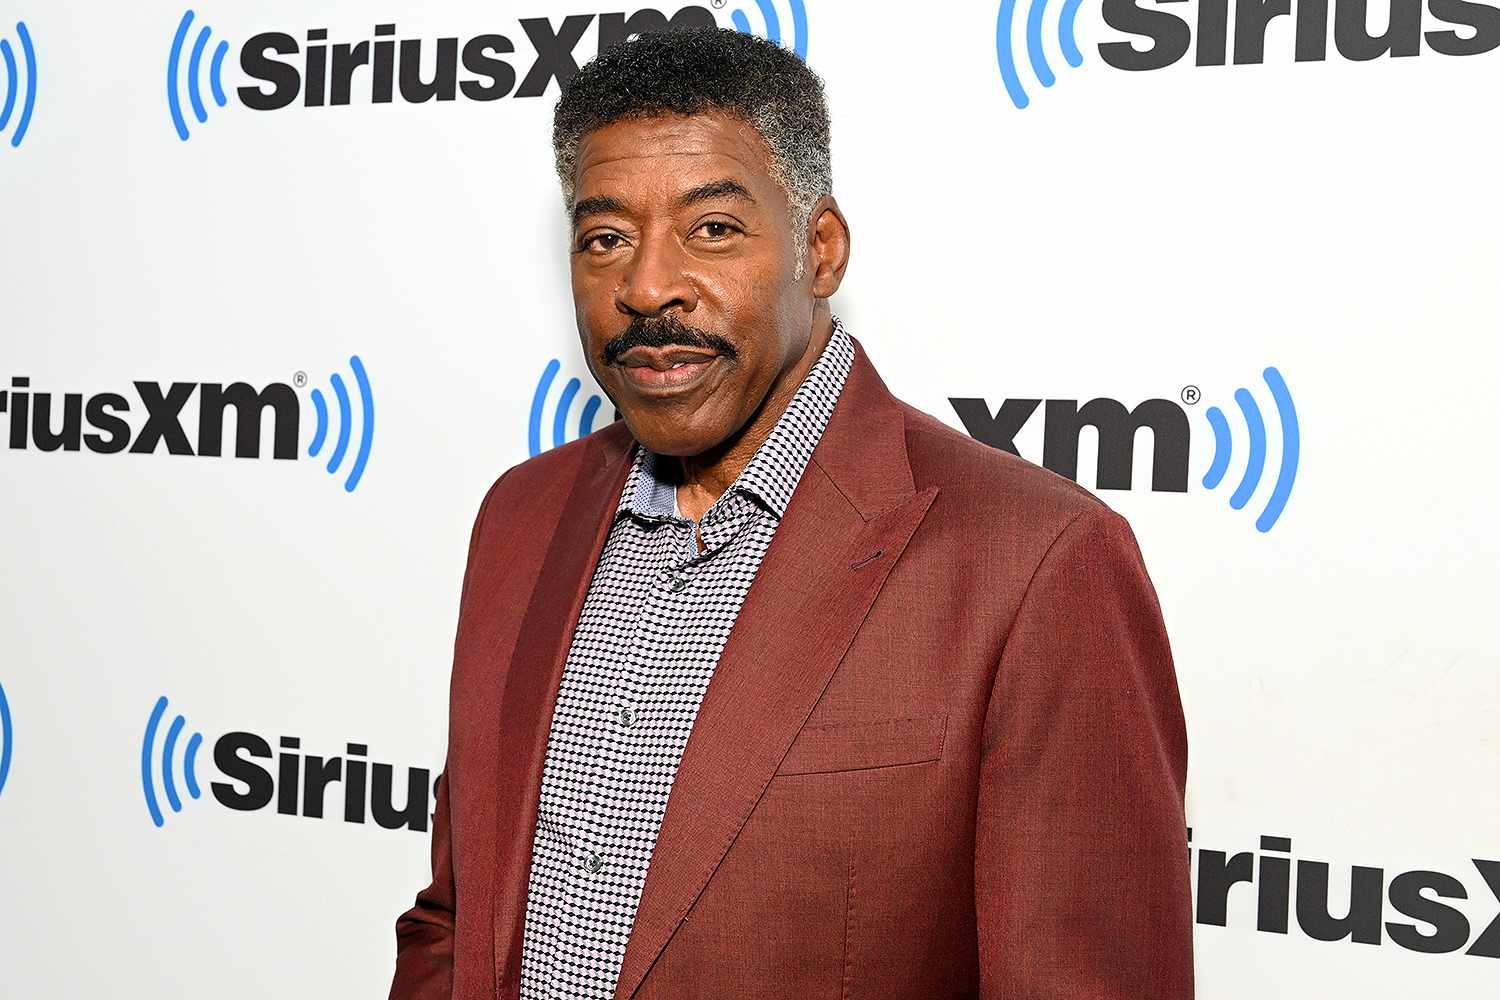 Ernie Hudson ‘Almost Died’ After Cancer Treatment Complications (Exclusive) [Video]